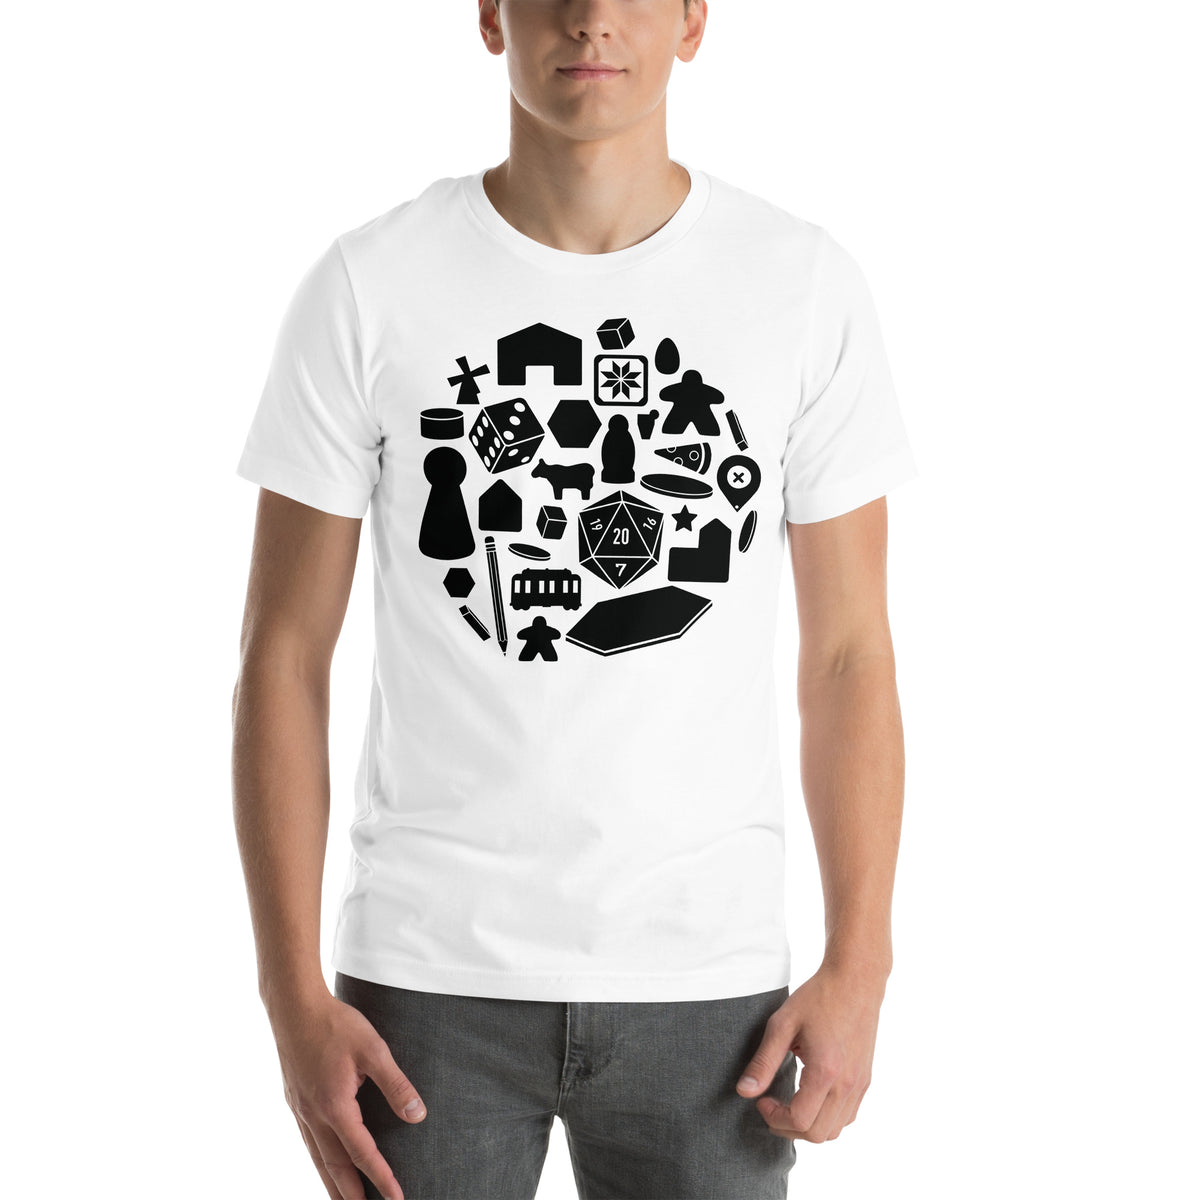 Board Game Pieces T-Shirt - Meeple Shirts